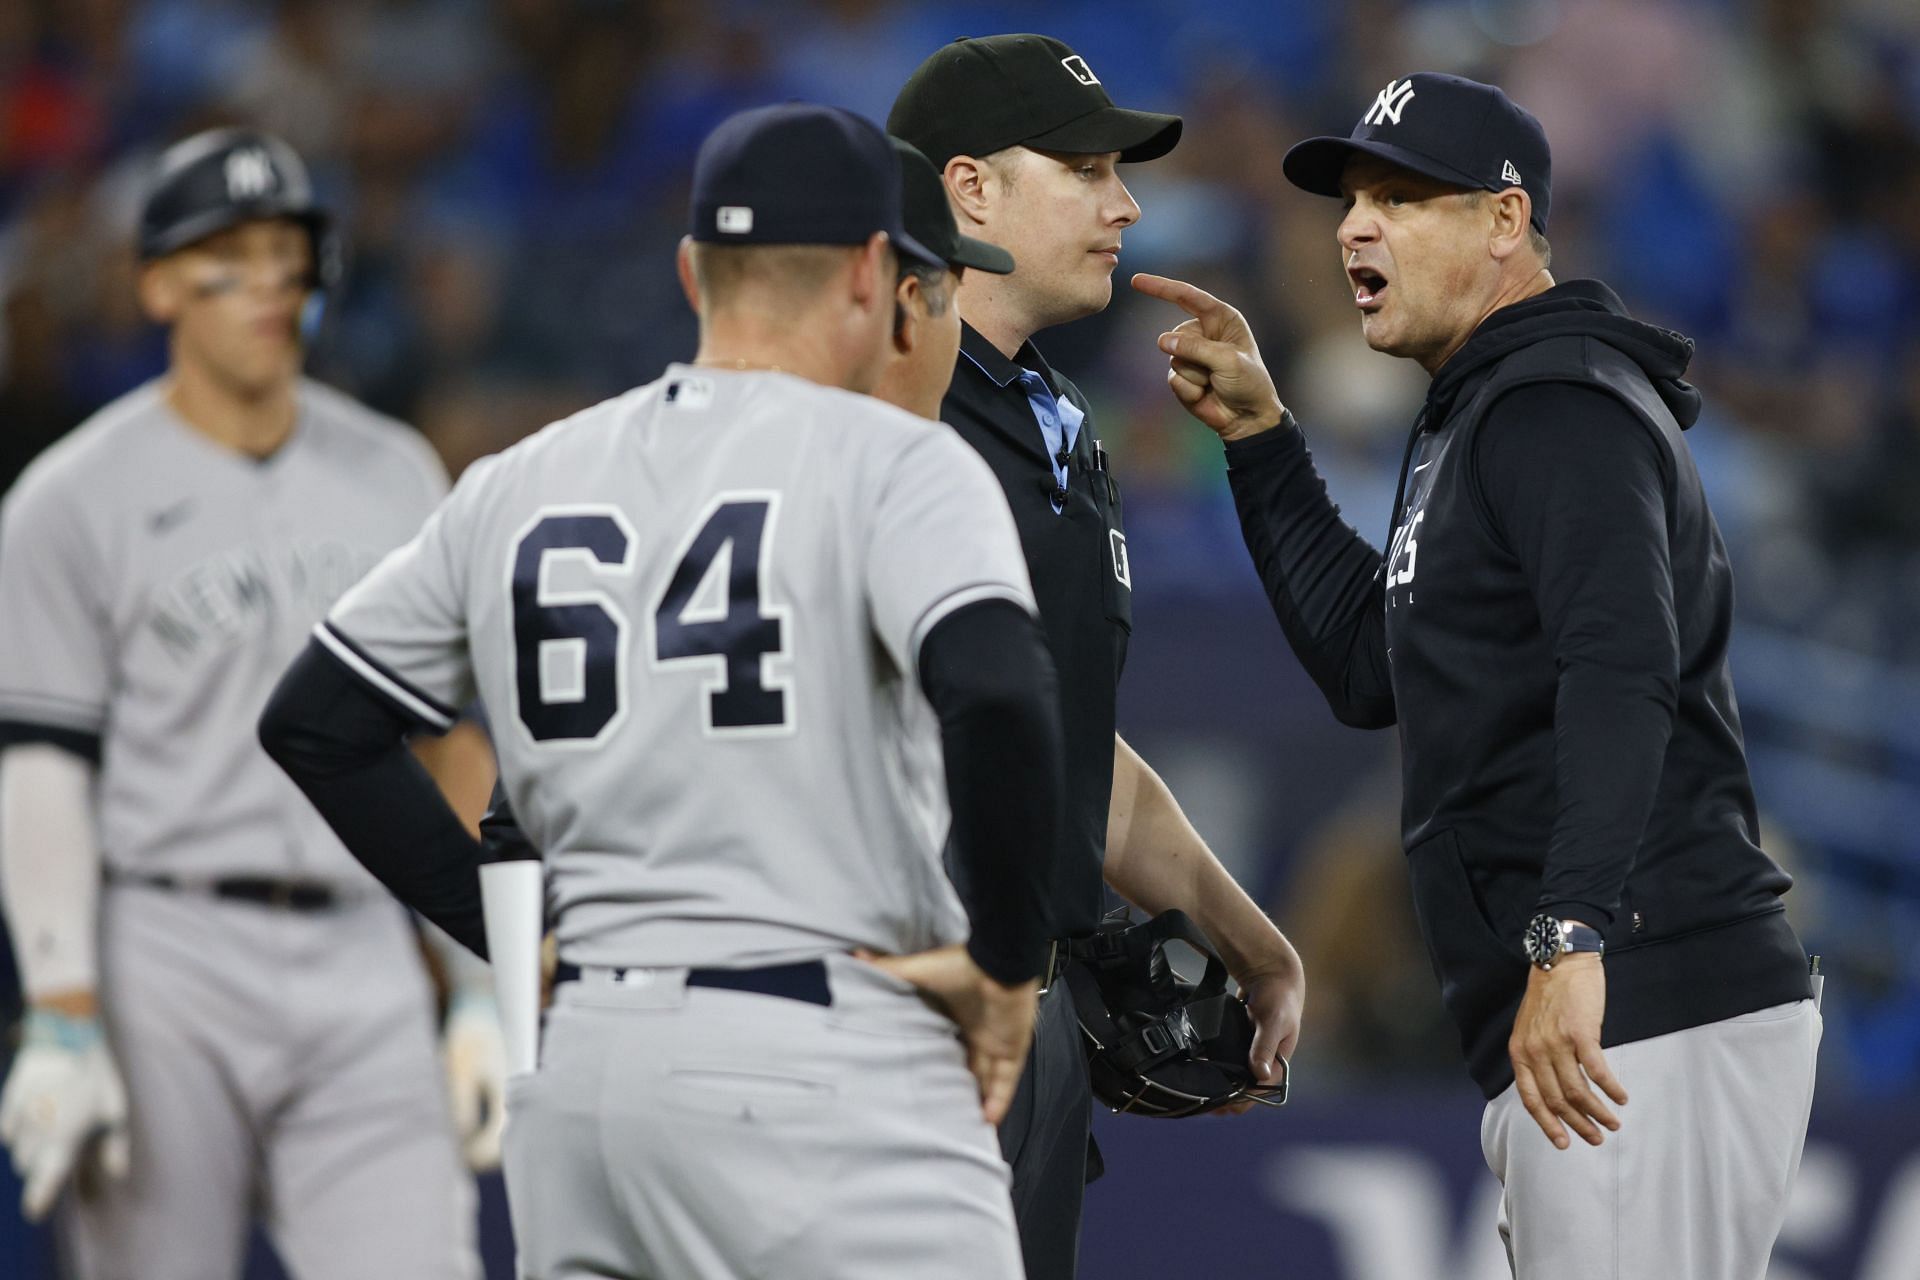 Aaron Boone chews out Yankees after brutal loss: 'He obviously was